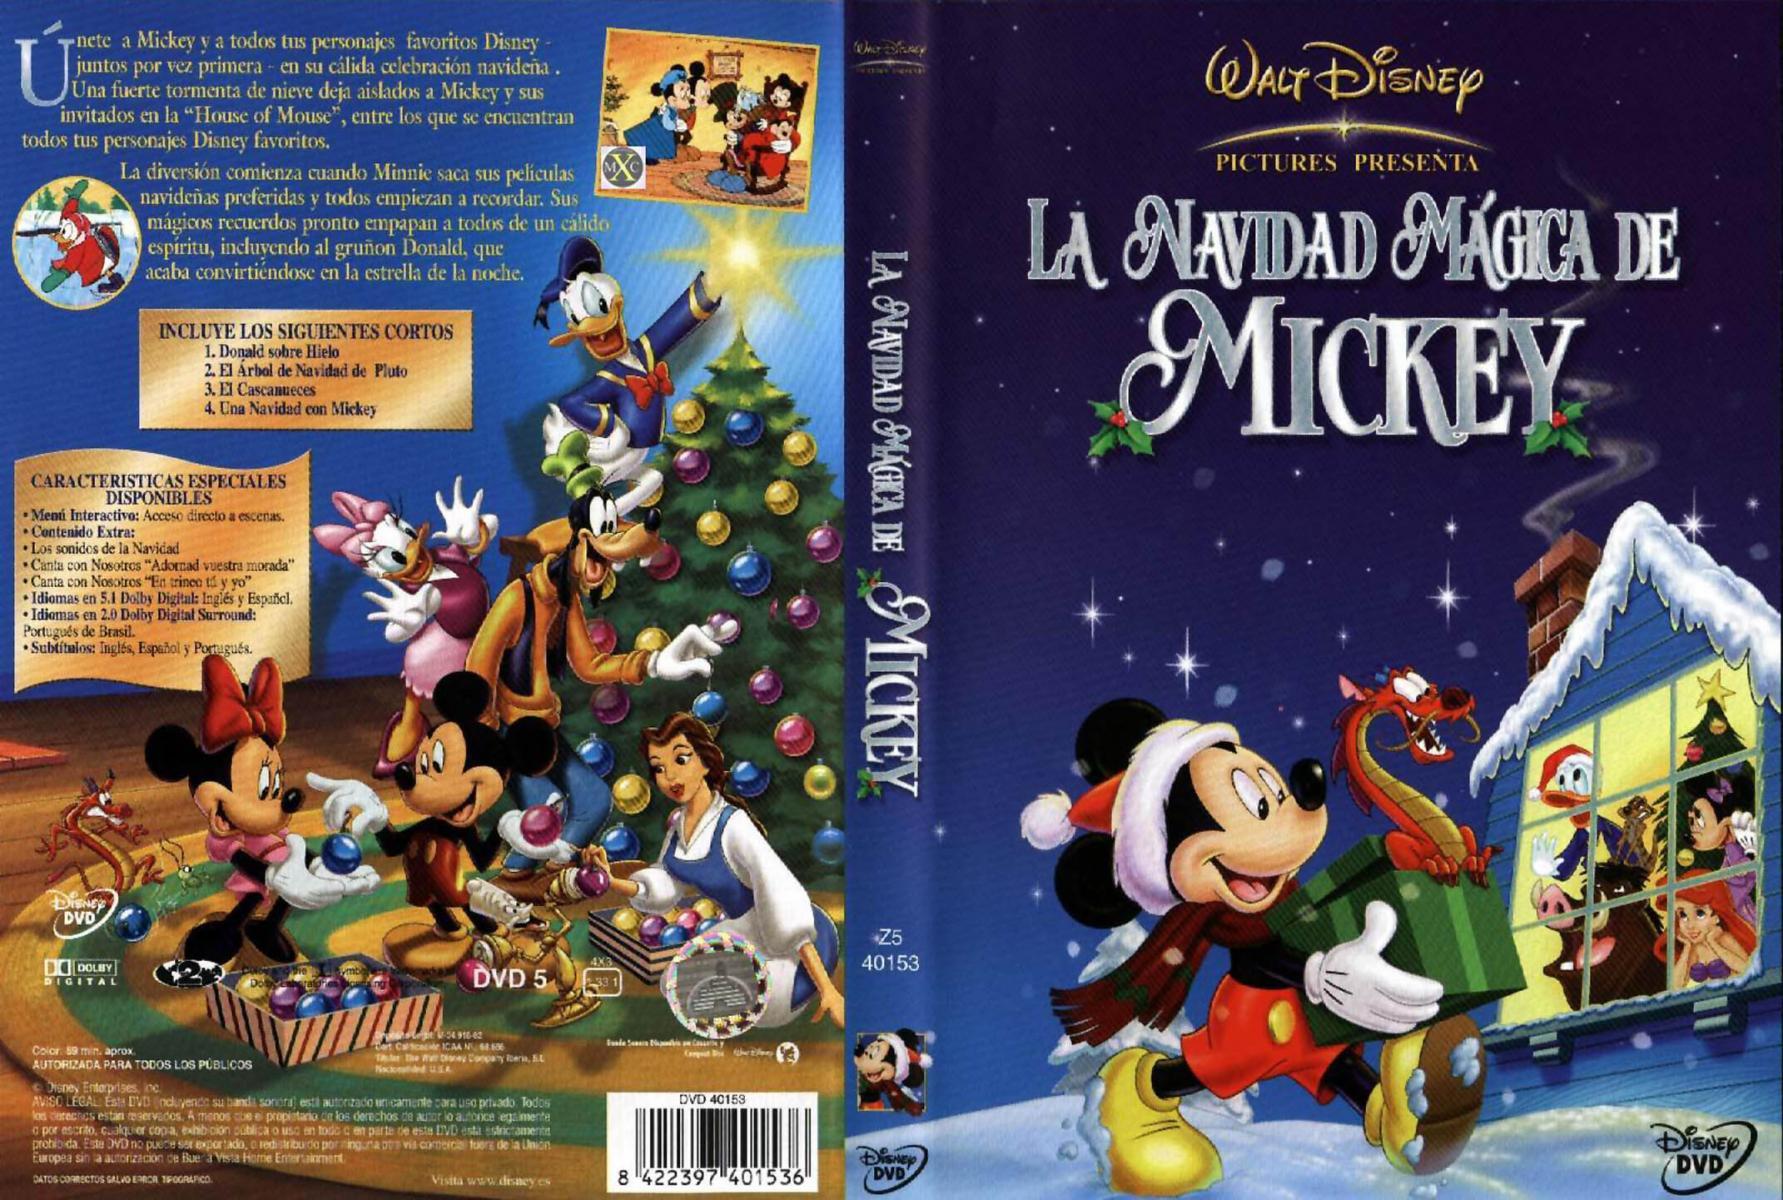 Image gallery for Mickey's Magical Christmas: Snowed in at the House of Mouse ...1783 x 1200